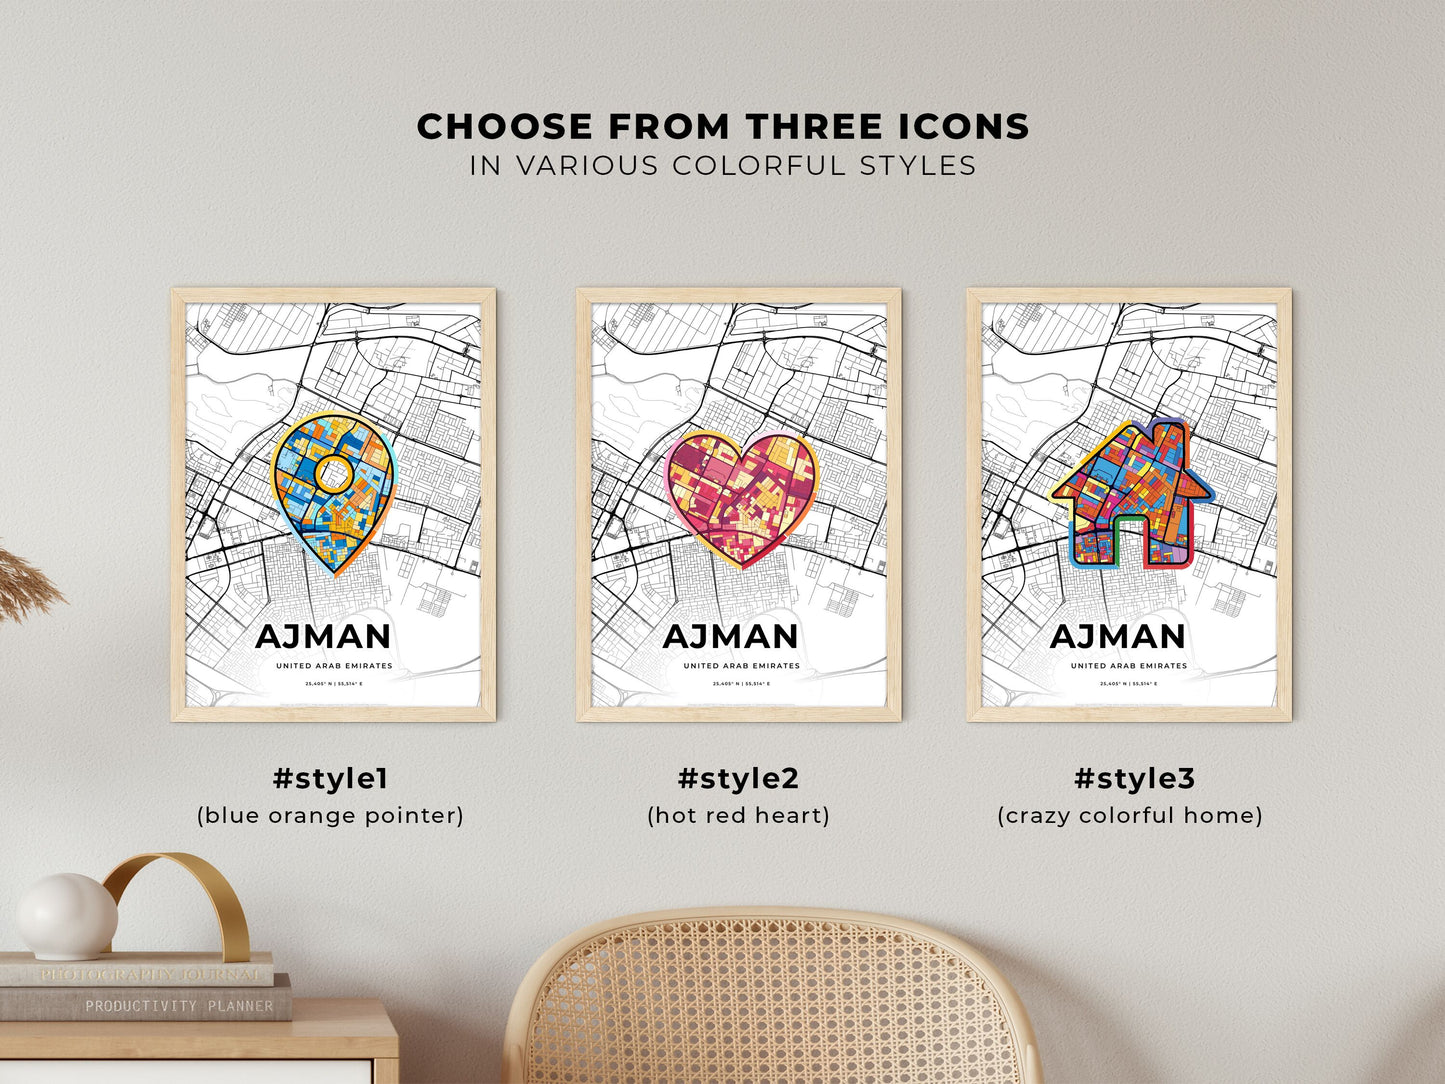 AJMAN UNITED ARAB EMIRATES minimal art map with a colorful icon. Where it all began, Couple map gift.